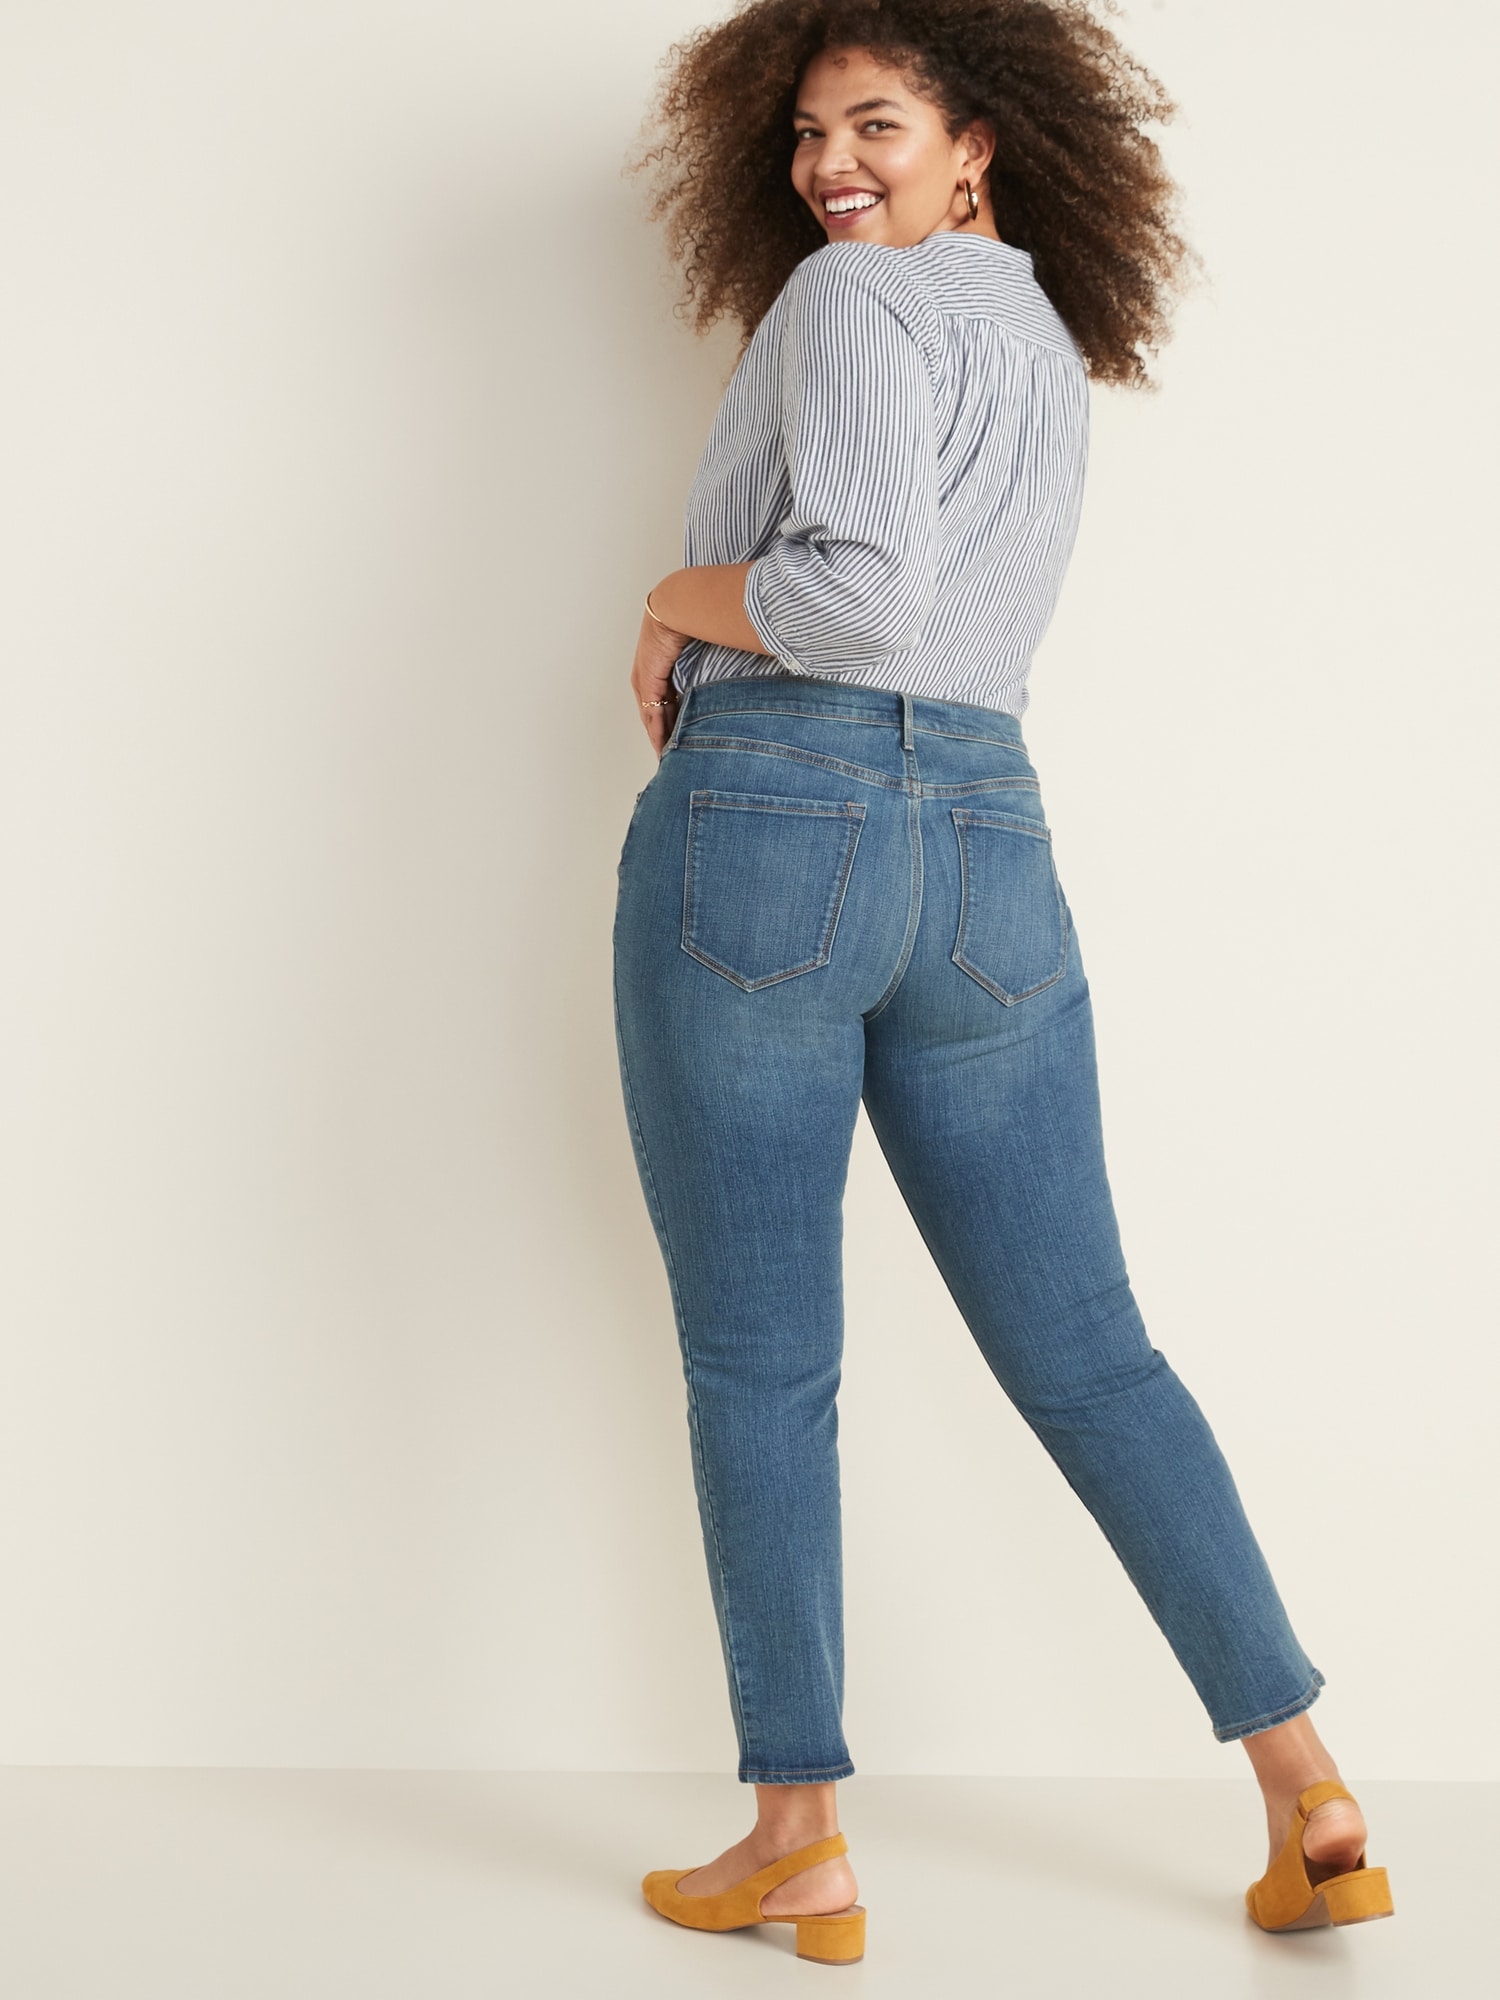 Gap, Old Navy Turn to Multi-Sized Jeans for Women